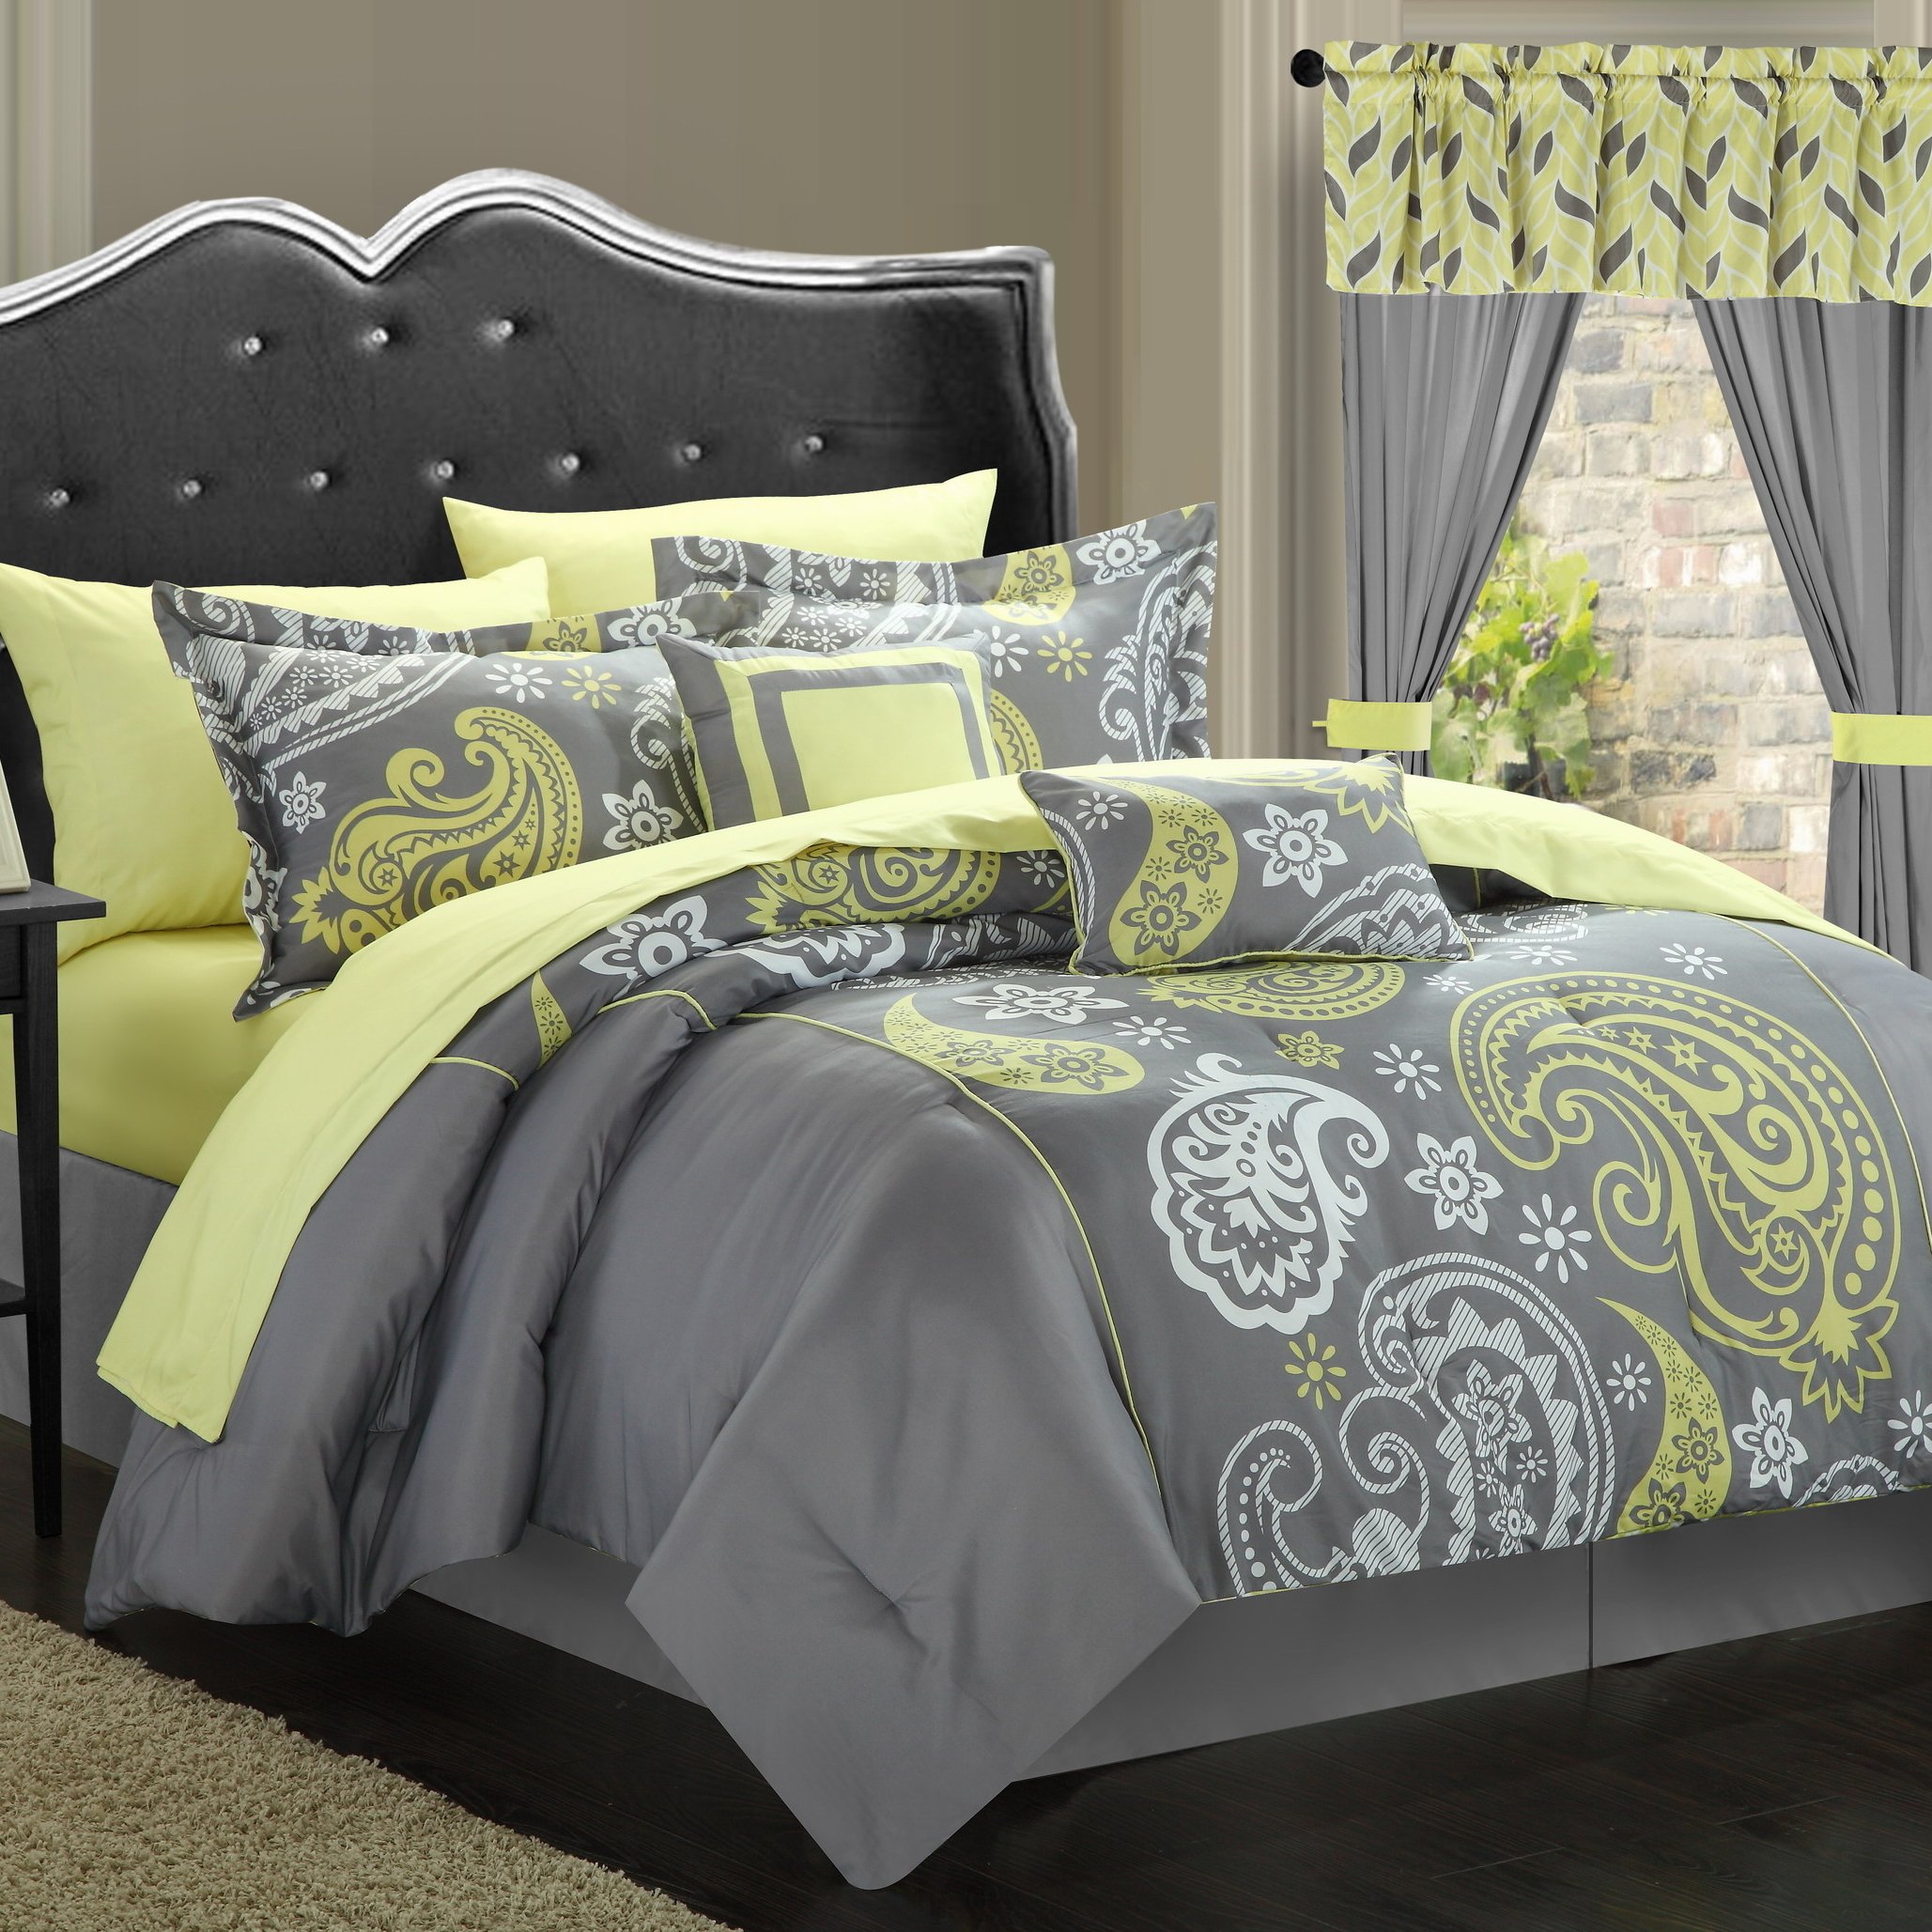 Olivia 20-Piece Paisley Print Reversible Complete Bed In A Bag Comforter Set - Grey, King